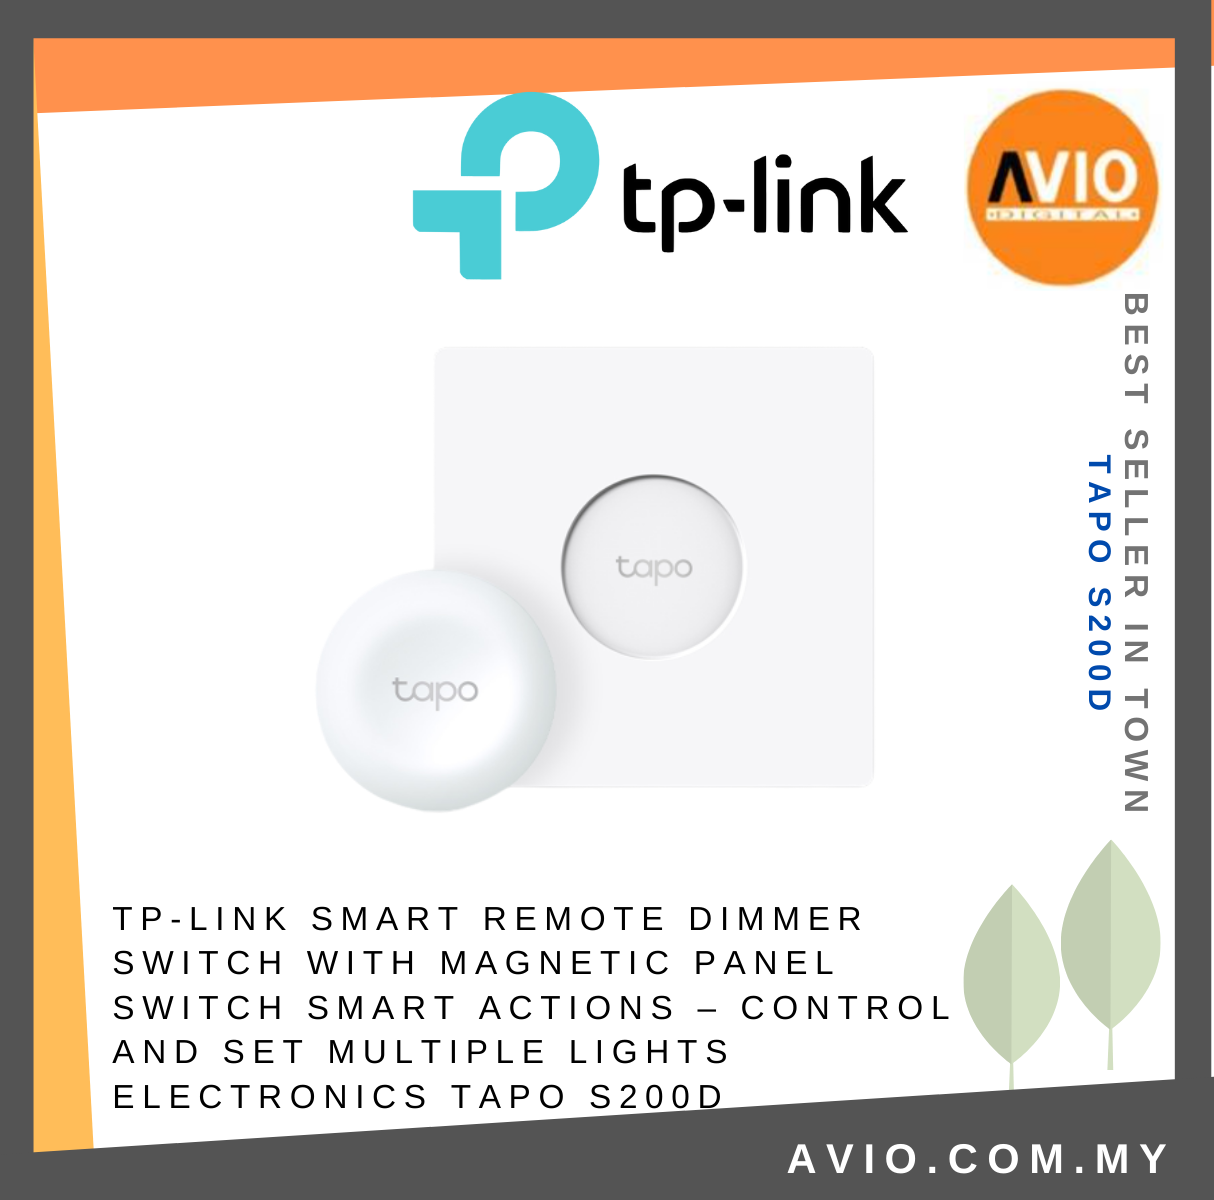 TP-LINK Tplink Smart Button Remote Lightning Dimmer Door Bell Alarm Other  Tapo Devices Button Control Wall Tapo S200D TAPO TP-LINK Johor Bahru (JB),  Kempas, Johor Jaya Supplier, Suppliers, Supply, Supplies | Avio